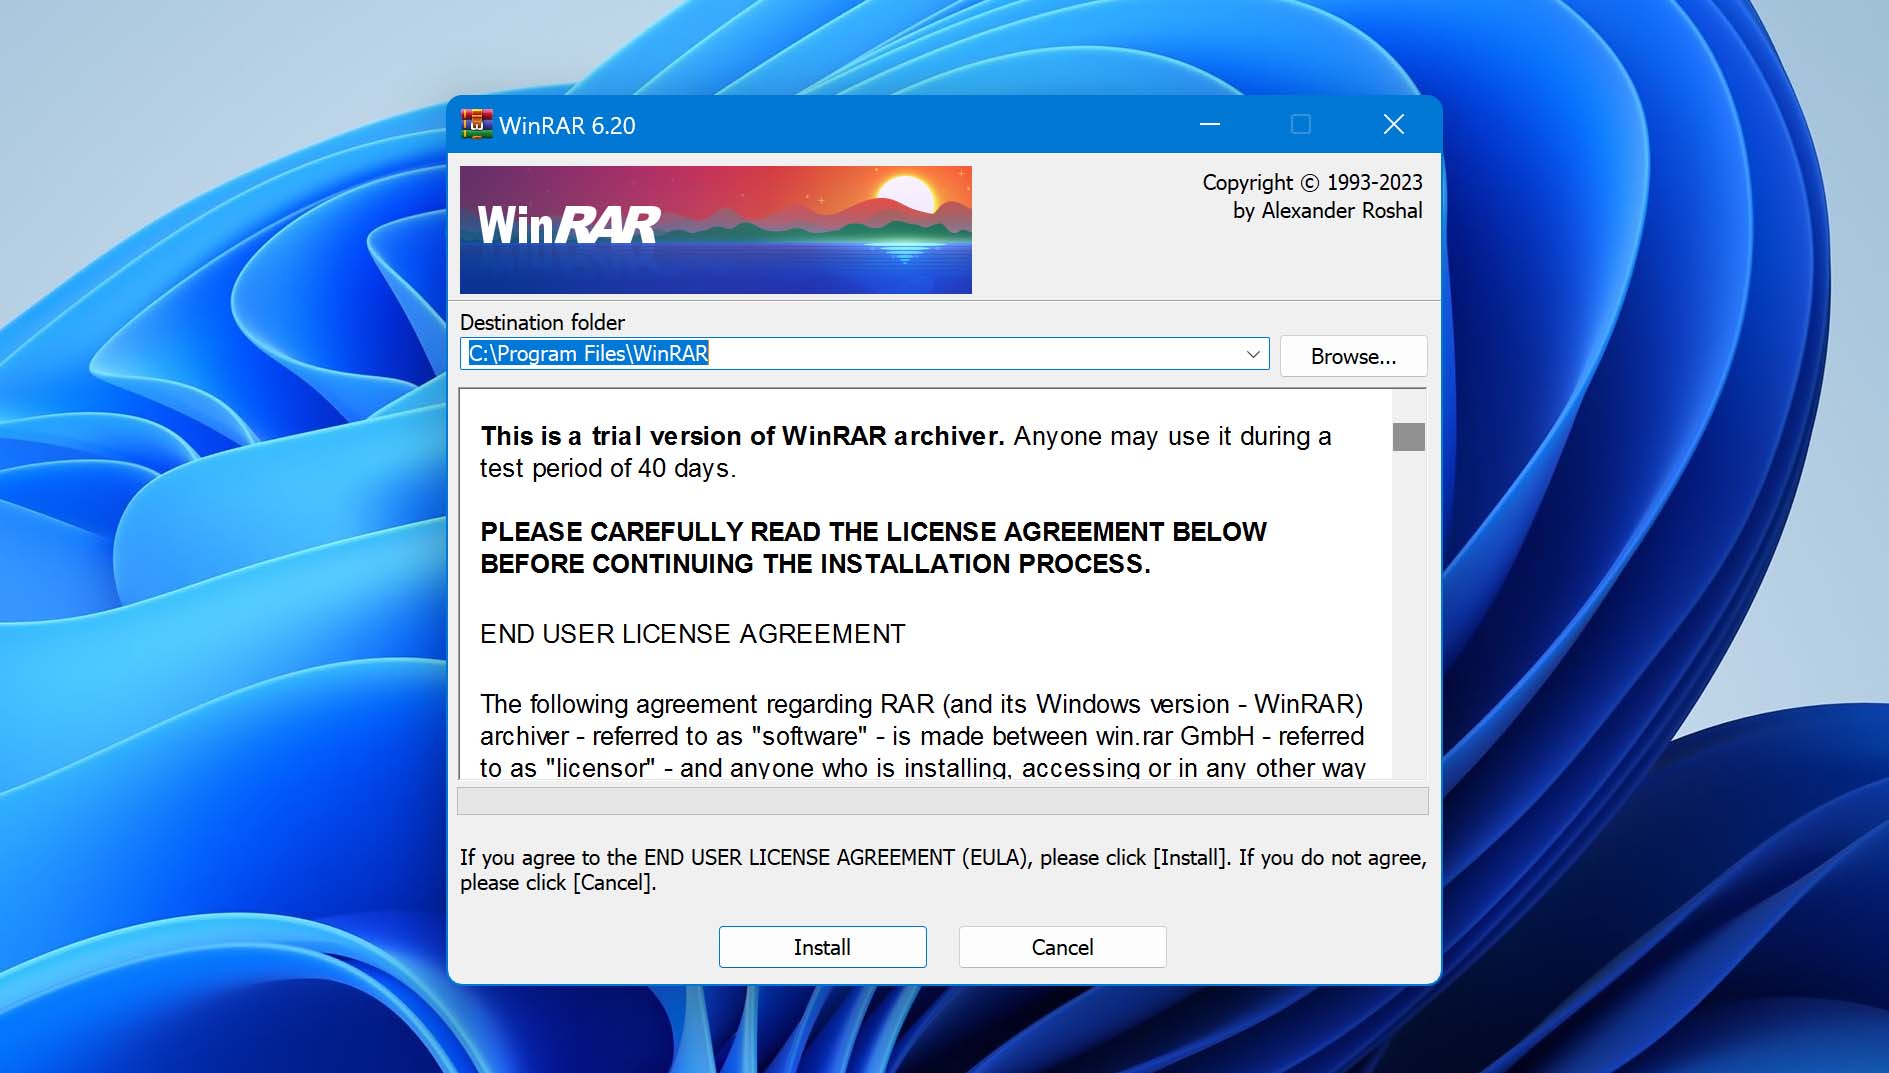 The process of installing Winrar.